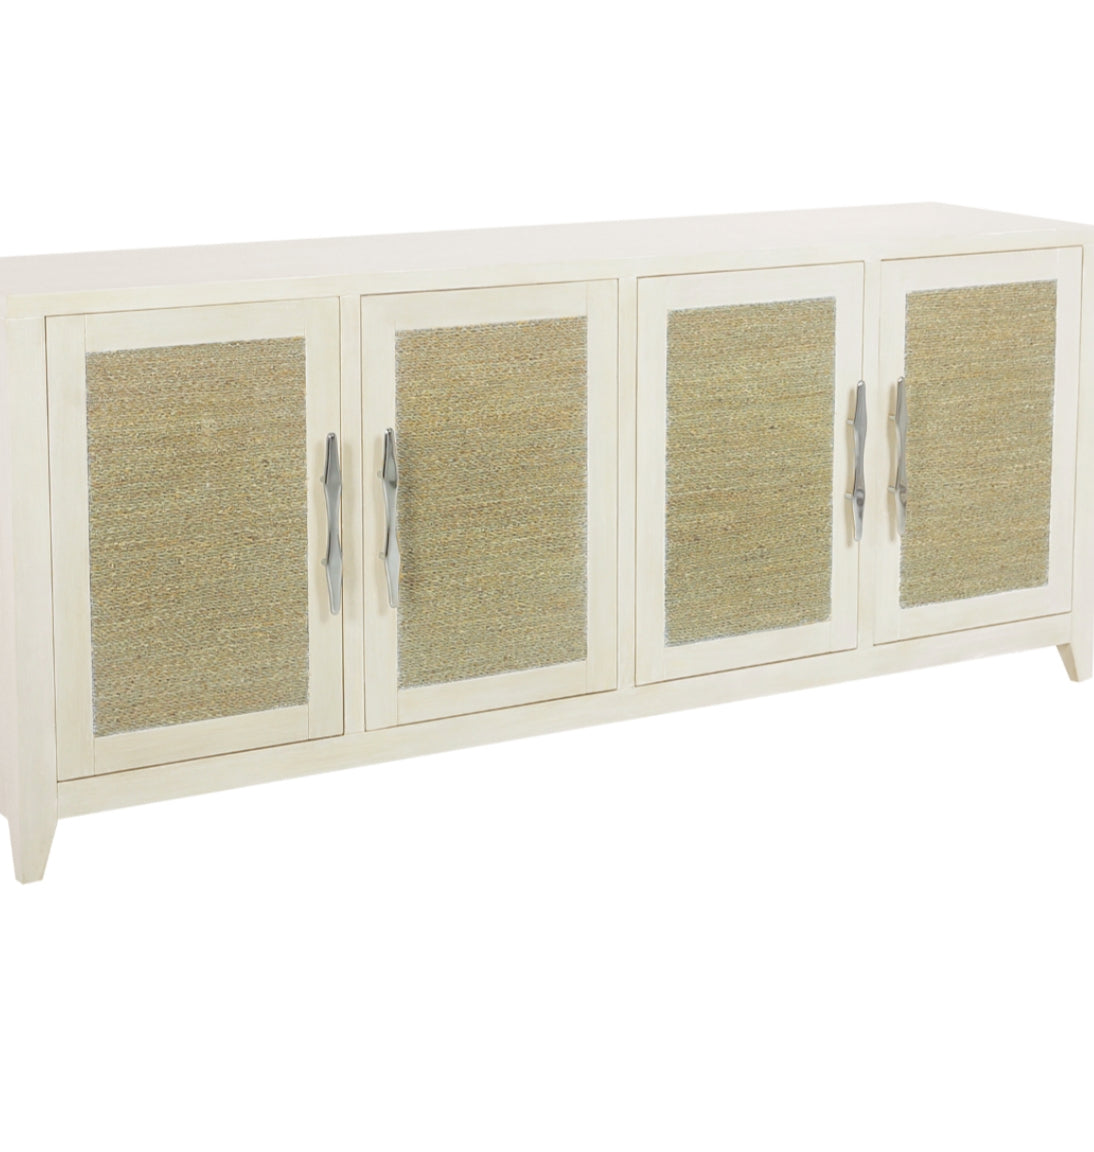 The Joyner 4-Door Credenza is ideal for adding texture and depth to a coastal or organic inspired room. Made from wood and accented with wicker insets, it comes in a bleached wood finish, giving it a fresh modern look. Its ample cupboard compartments are concealed behind four doors, making it ideal for storing household items discreetly.